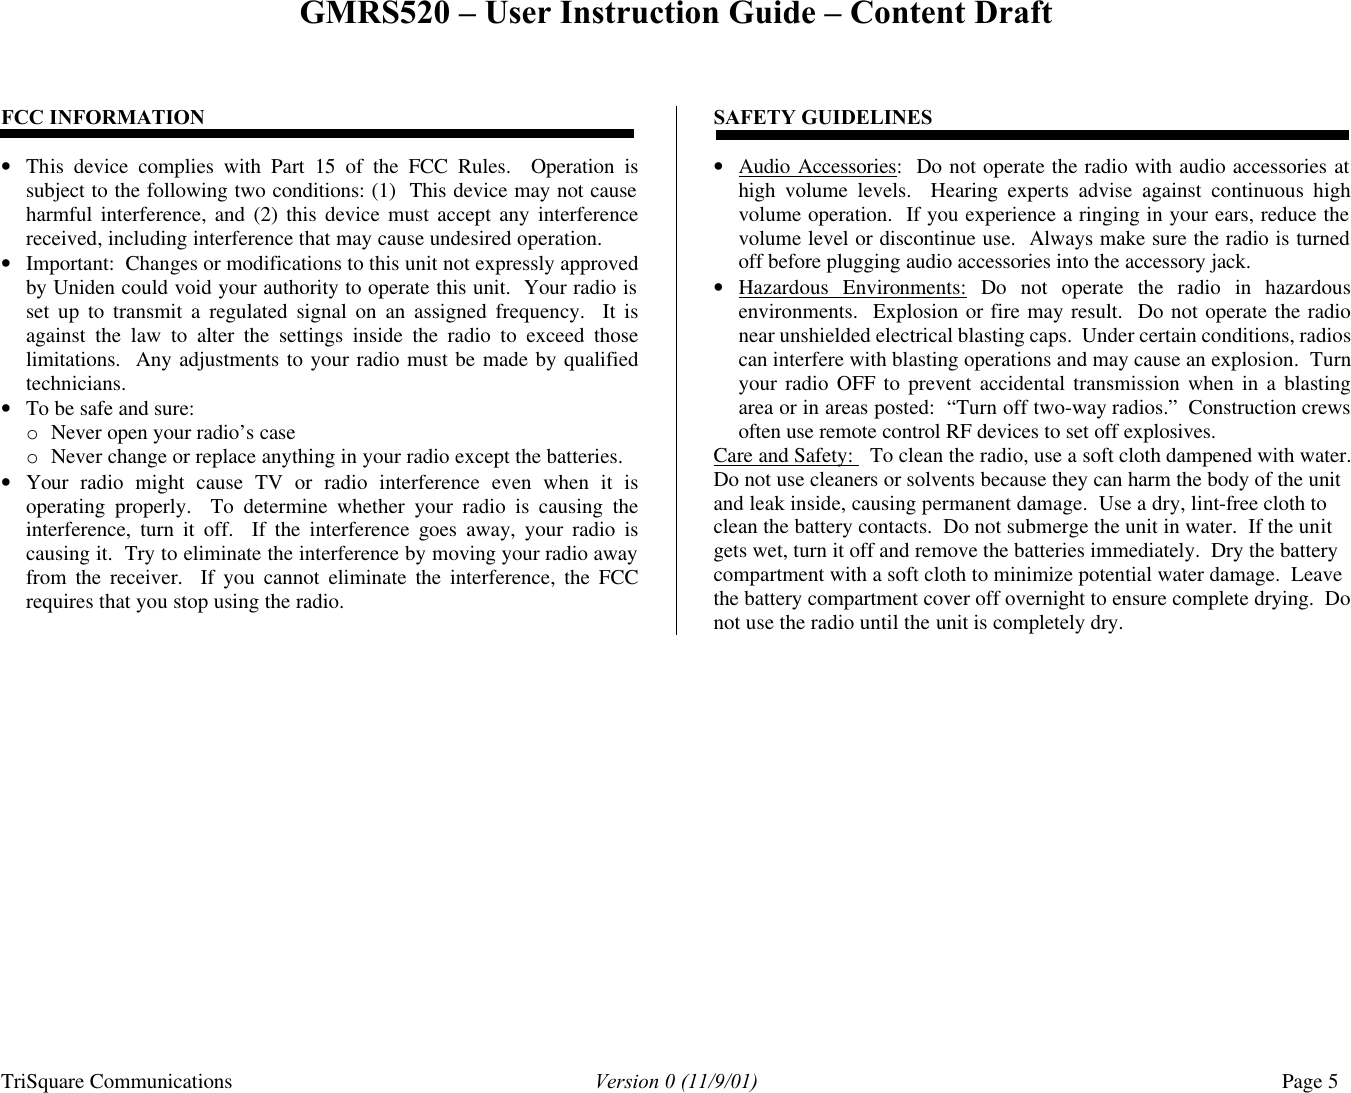 GMRS520 – User Instruction Guide – Content Draft TriSquare Communications Version 0 (11/9/01) Page 5  FCC INFORMATION  • This device complies with Part 15 of the FCC Rules.  Operation is subject to the following two conditions: (1)  This device may not cause harmful interference, and (2) this device must accept any interference received, including interference that may cause undesired operation. • Important:  Changes or modifications to this unit not expressly approved by Uniden could void your authority to operate this unit.  Your radio is set up to transmit a regulated signal on an assigned frequency.  It is against the law to alter the settings inside the radio to exceed those limitations.  Any adjustments to your radio must be made by qualified technicians. • To be safe and sure: o Never open your radio’s case o Never change or replace anything in your radio except the batteries. • Your radio might cause TV or radio interference even when it is operating properly.  To determine whether your radio is causing the interference, turn it off.  If the interference goes away, your radio is causing it.  Try to eliminate the interference by moving your radio away from the receiver.  If you cannot eliminate the interference, the FCC requires that you stop using the radio. SAFETY GUIDELINES  • Audio Accessories:  Do not operate the radio with audio accessories at high volume levels.  Hearing experts advise against continuous high volume operation.  If you experience a ringing in your ears, reduce the volume level or discontinue use.  Always make sure the radio is turned off before plugging audio accessories into the accessory jack. • Hazardous Environments: Do not operate the radio in hazardous environments.  Explosion or fire may result.  Do not operate the radio near unshielded electrical blasting caps.  Under certain conditions, radios can interfere with blasting operations and may cause an explosion.  Turn your radio OFF to prevent accidental transmission when in a blasting area or in areas posted:  “Turn off two-way radios.”  Construction crews often use remote control RF devices to set off explosives. Care and Safety:   To clean the radio, use a soft cloth dampened with water.  Do not use cleaners or solvents because they can harm the body of the unit and leak inside, causing permanent damage.  Use a dry, lint-free cloth to clean the battery contacts.  Do not submerge the unit in water.  If the unit gets wet, turn it off and remove the batteries immediately.  Dry the battery compartment with a soft cloth to minimize potential water damage.  Leave the battery compartment cover off overnight to ensure complete drying.  Do not use the radio until the unit is completely dry. 